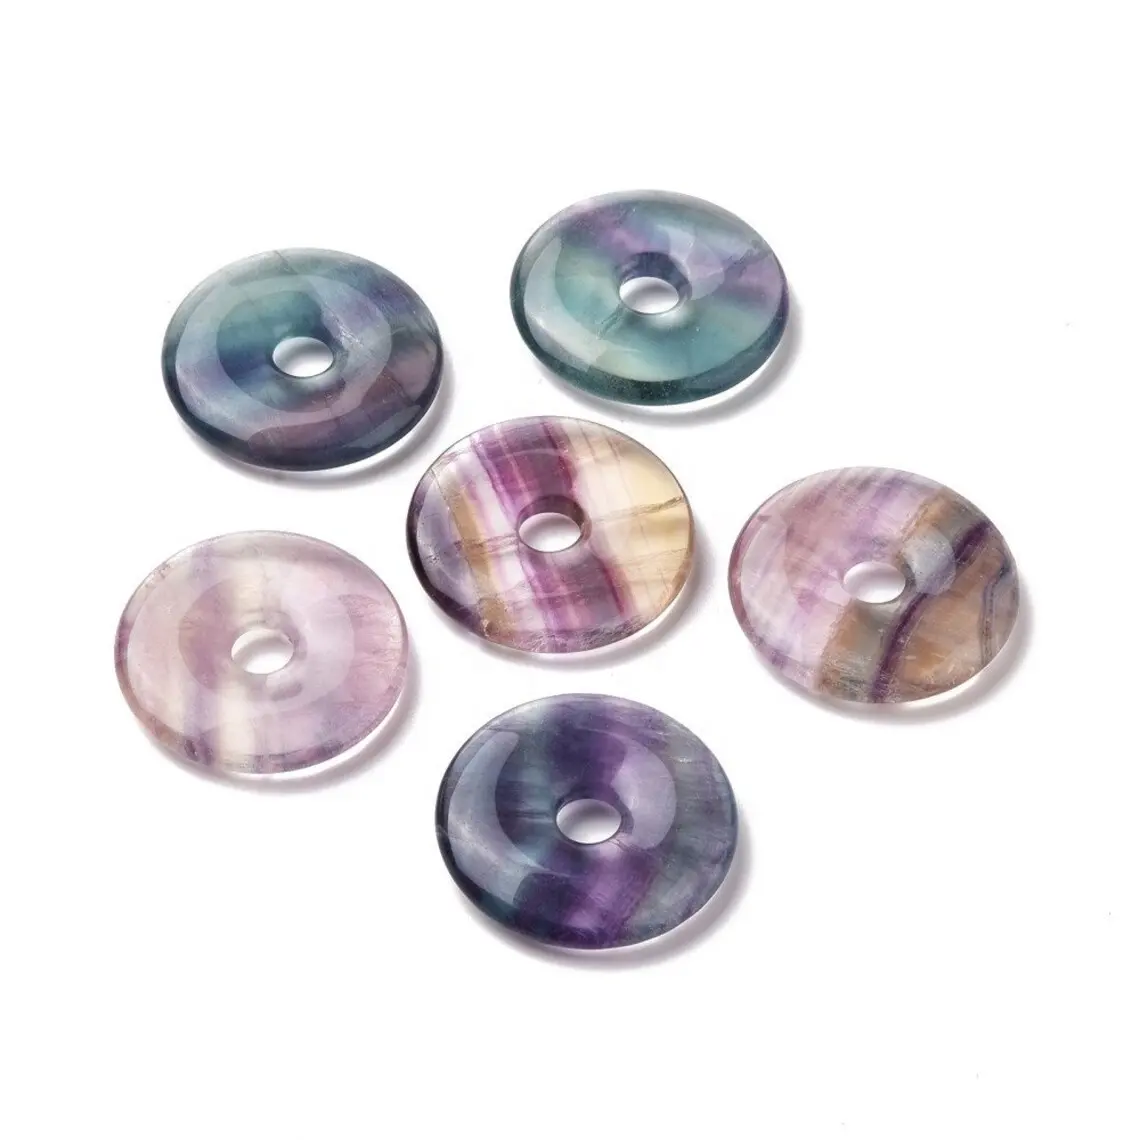 Polished Rainbow Fluorite Gemstone Donut Disc Pendants Quartz Amulet Lucky Coin Crystal Stones for Jewelry Making